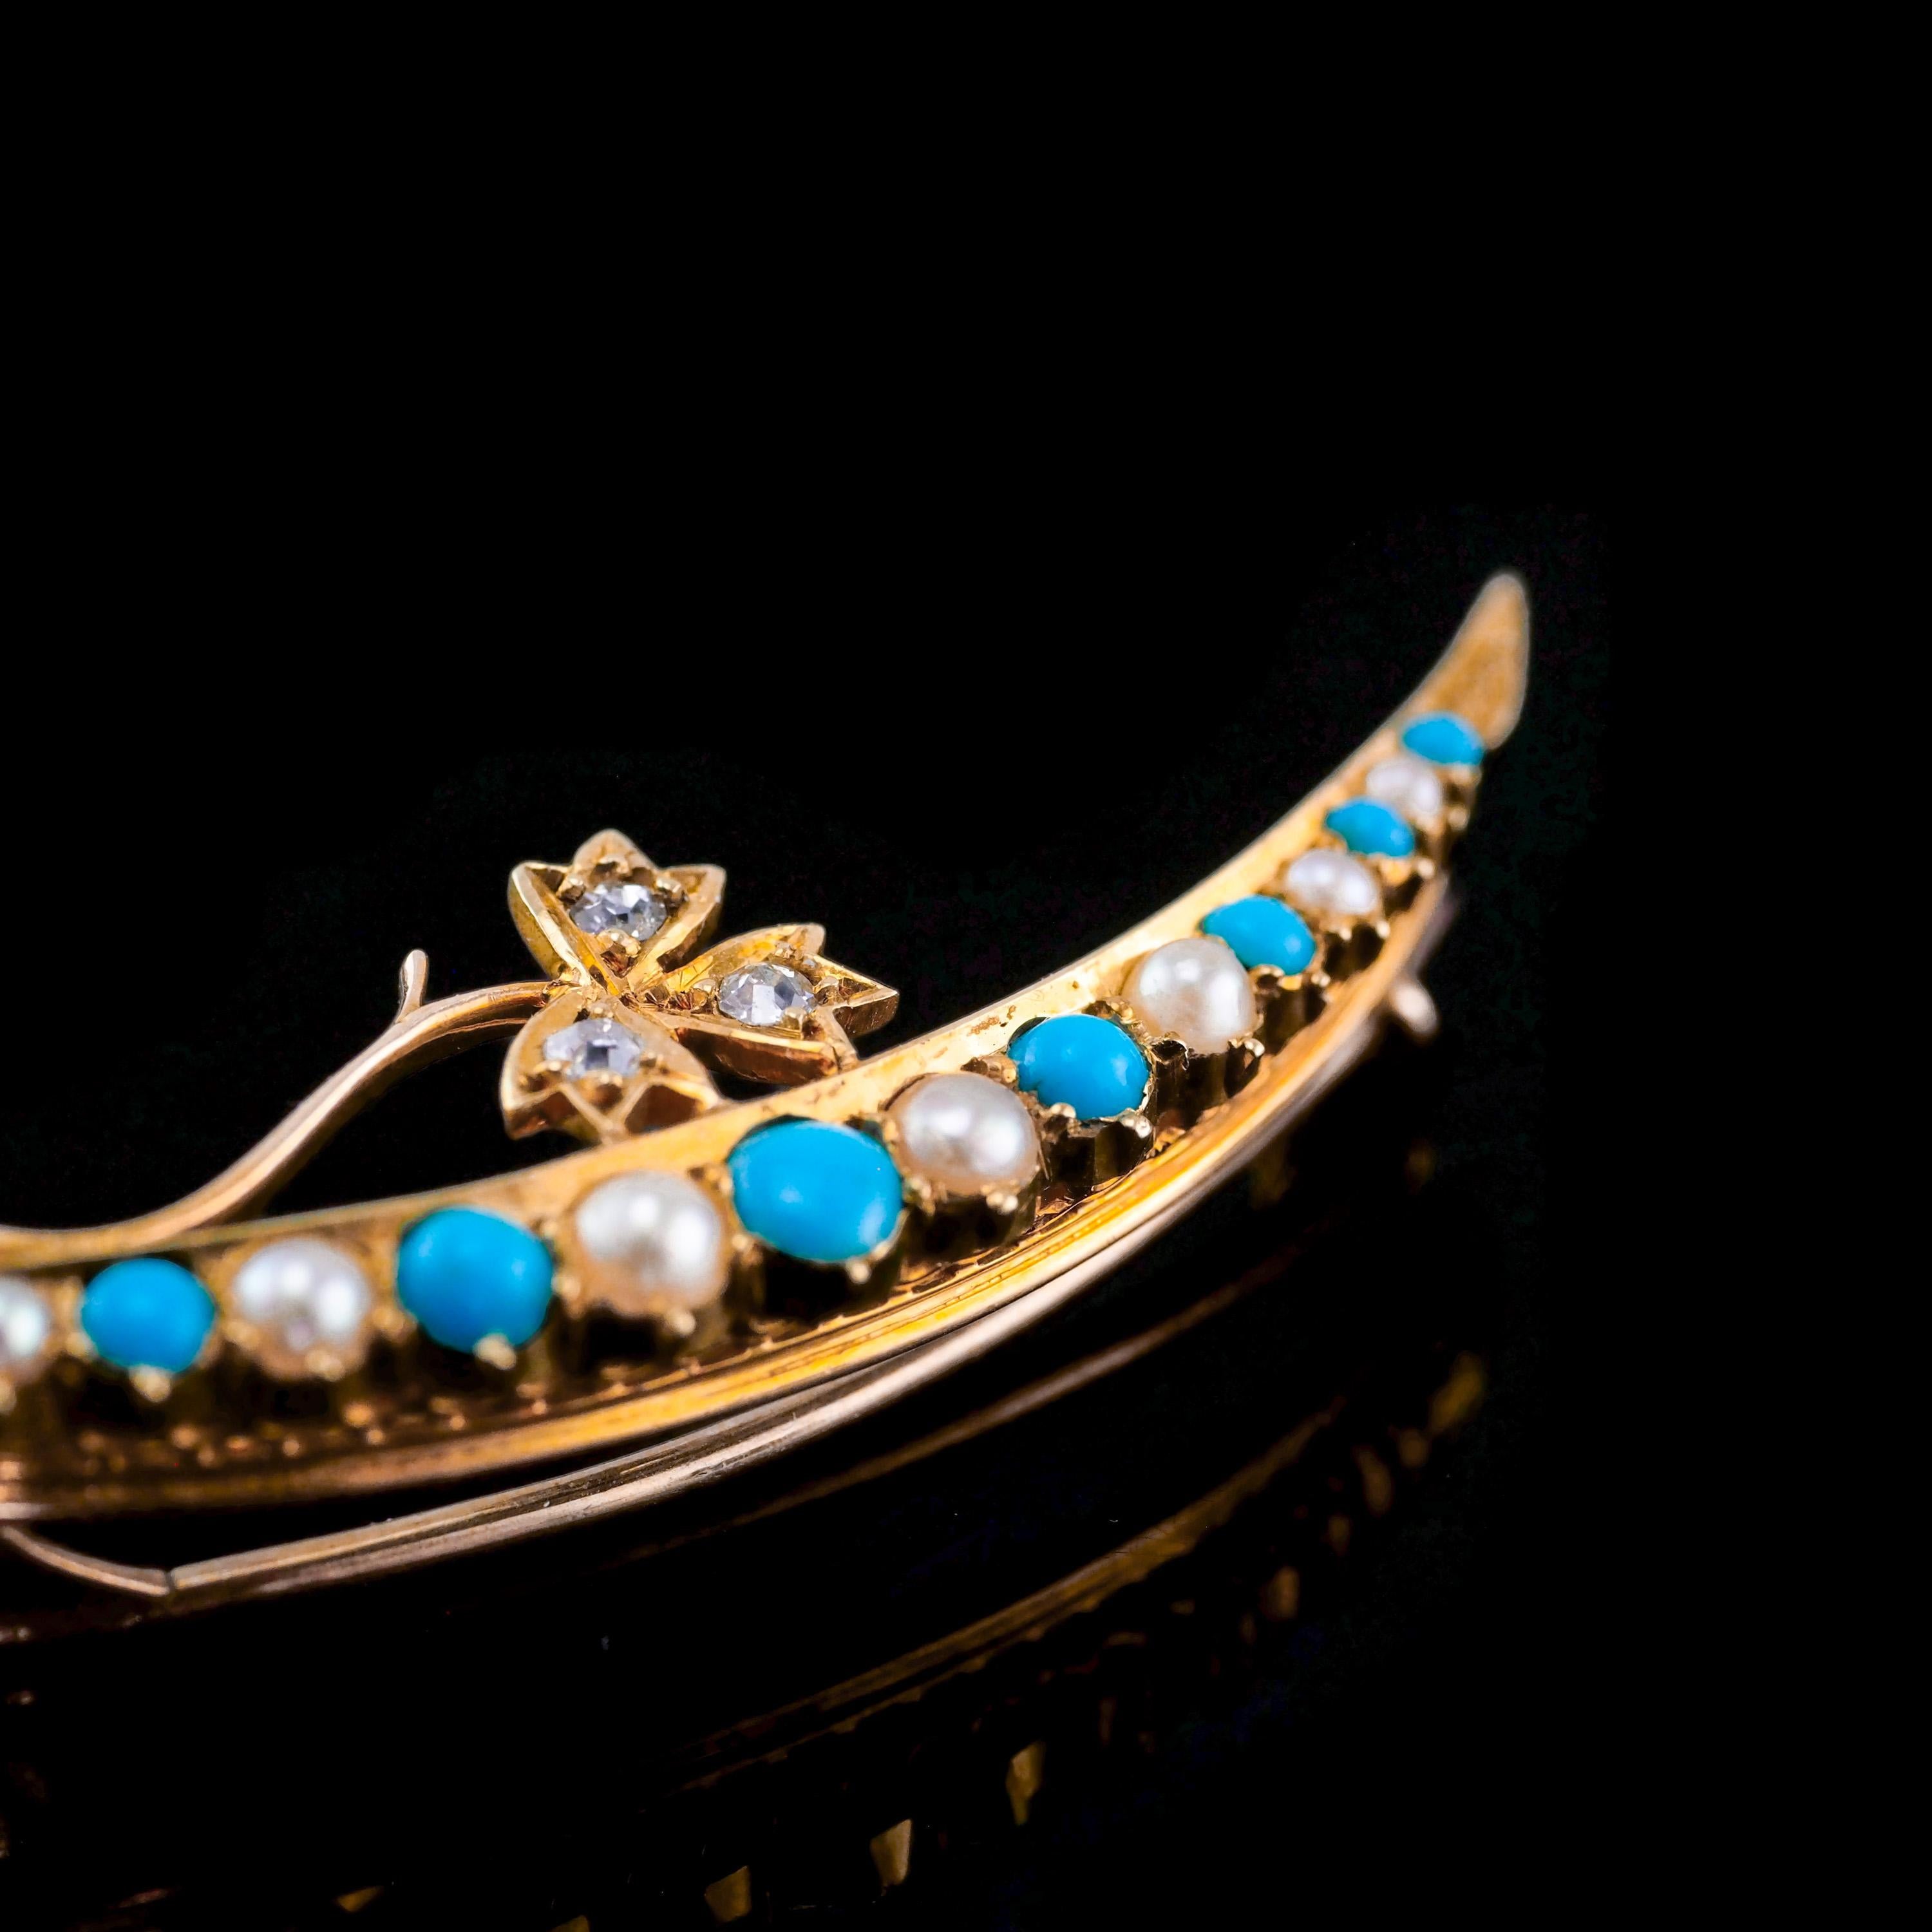 Antique Victorian 15k Gold Turquoise, Pearl & Diamond Crescent Brooch, c.1900 For Sale 7